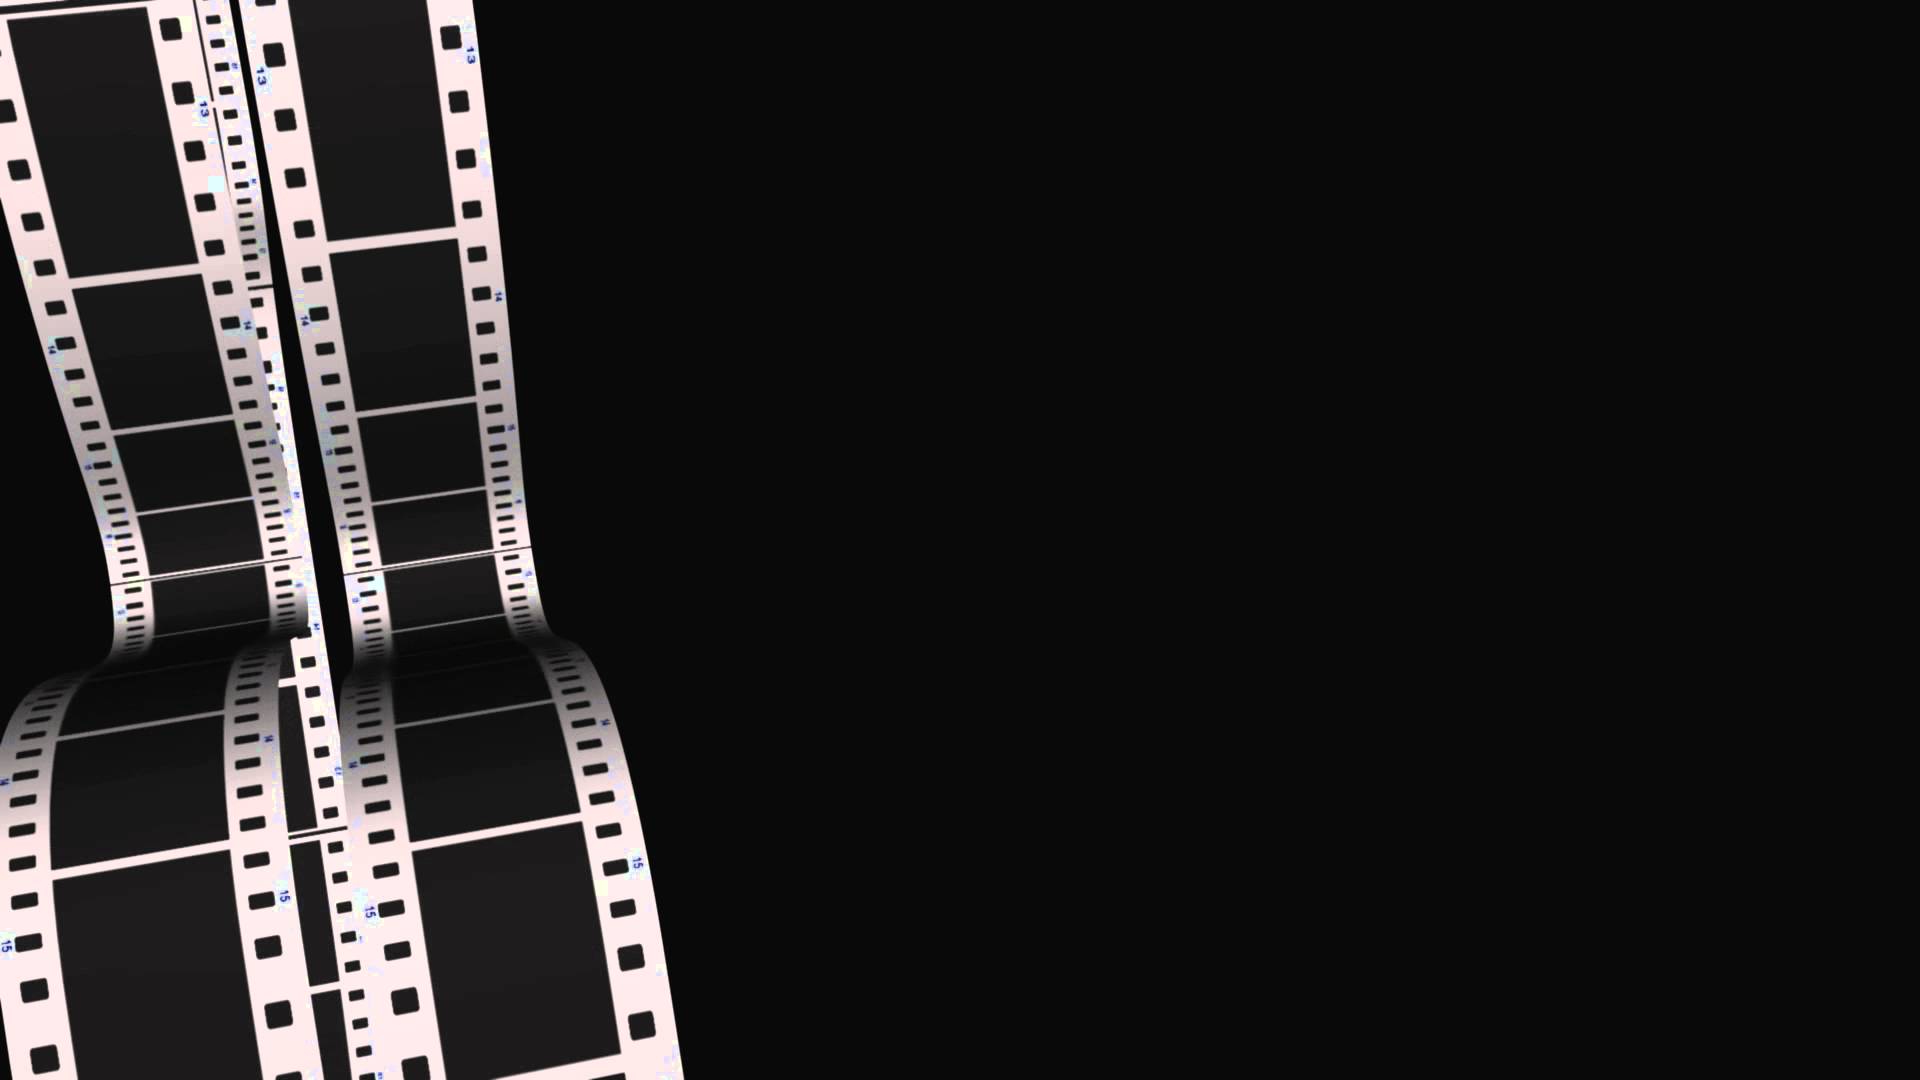  Download   35mm Film Reels   Theatre Animated Background